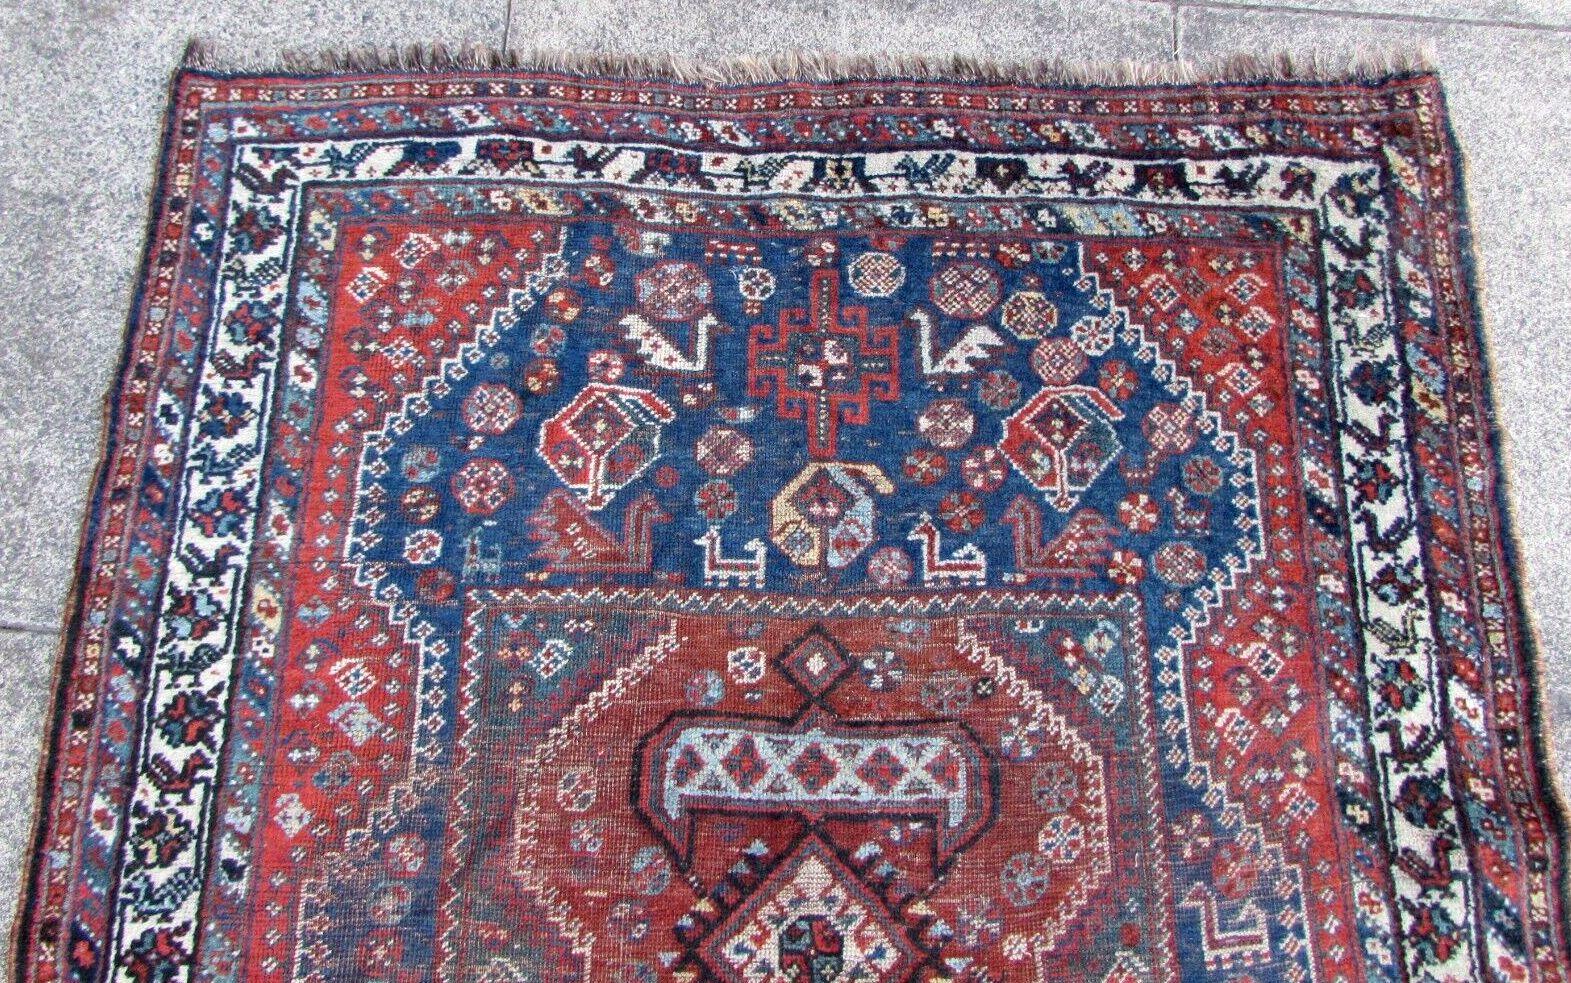 This is a stunning antique antique Persian Shiraz rug, handmade with wool material in the 1920s. It measures 3.8 feet by 4.9 feet (117cm x 150cm) and features a traditional Shiraz style with a beautiful decorative birds design. The background colors